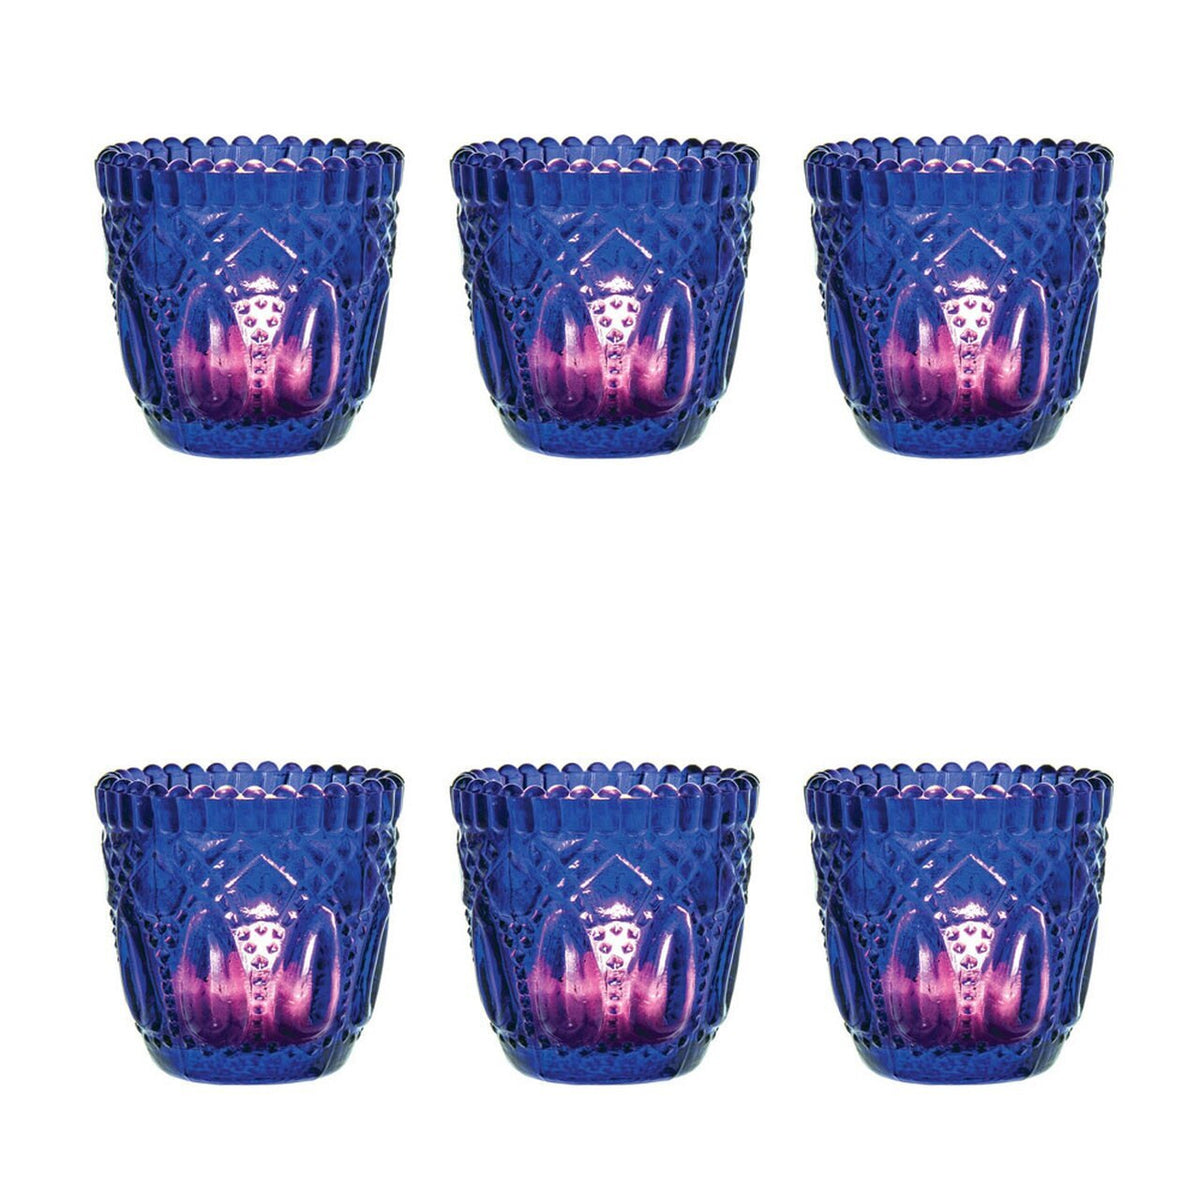 6 Pack | Faceted Vintage Glass Candle Holders (2.75-Inch, Lillian Design, Royal Purple) - Use with Tea Lights - For Home Decor, Parties and Wedding Decorations - PaperLanternStore.com - Paper Lanterns, Decor, Party Lights &amp; More